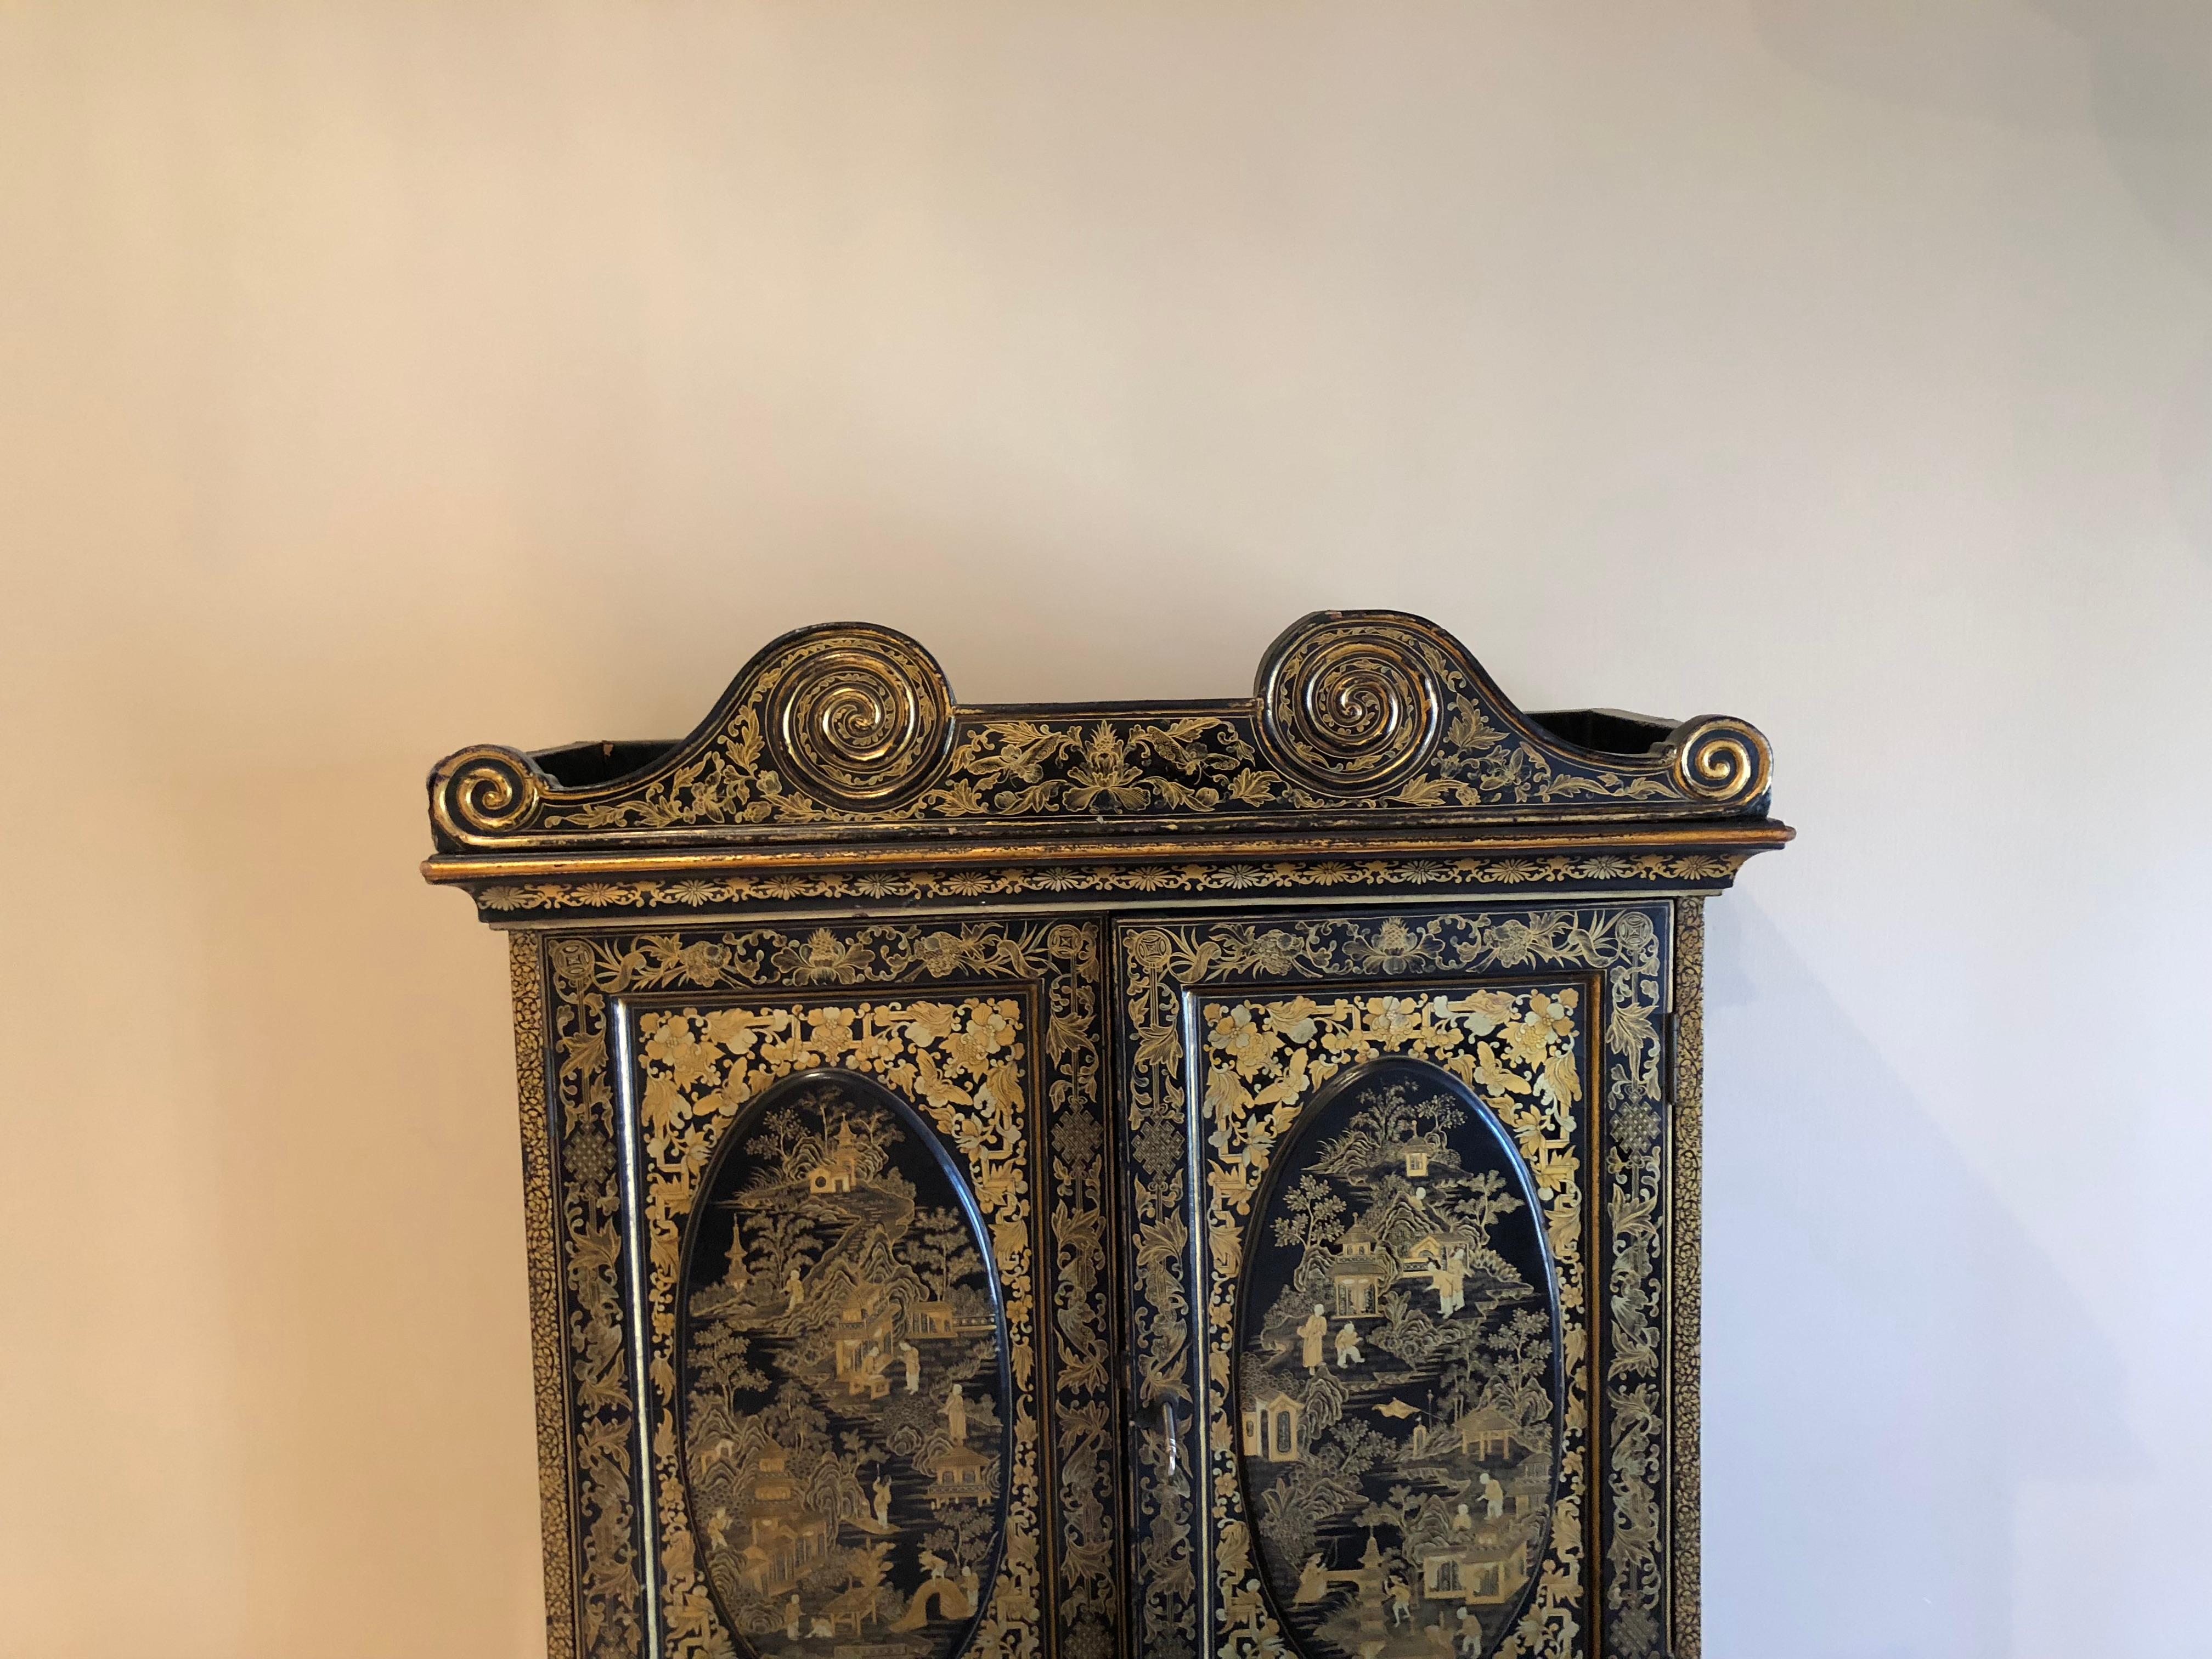 Exquisite Antique Chinese Export Gilt Decorated Black Lacquer Cabinet on Stand 4